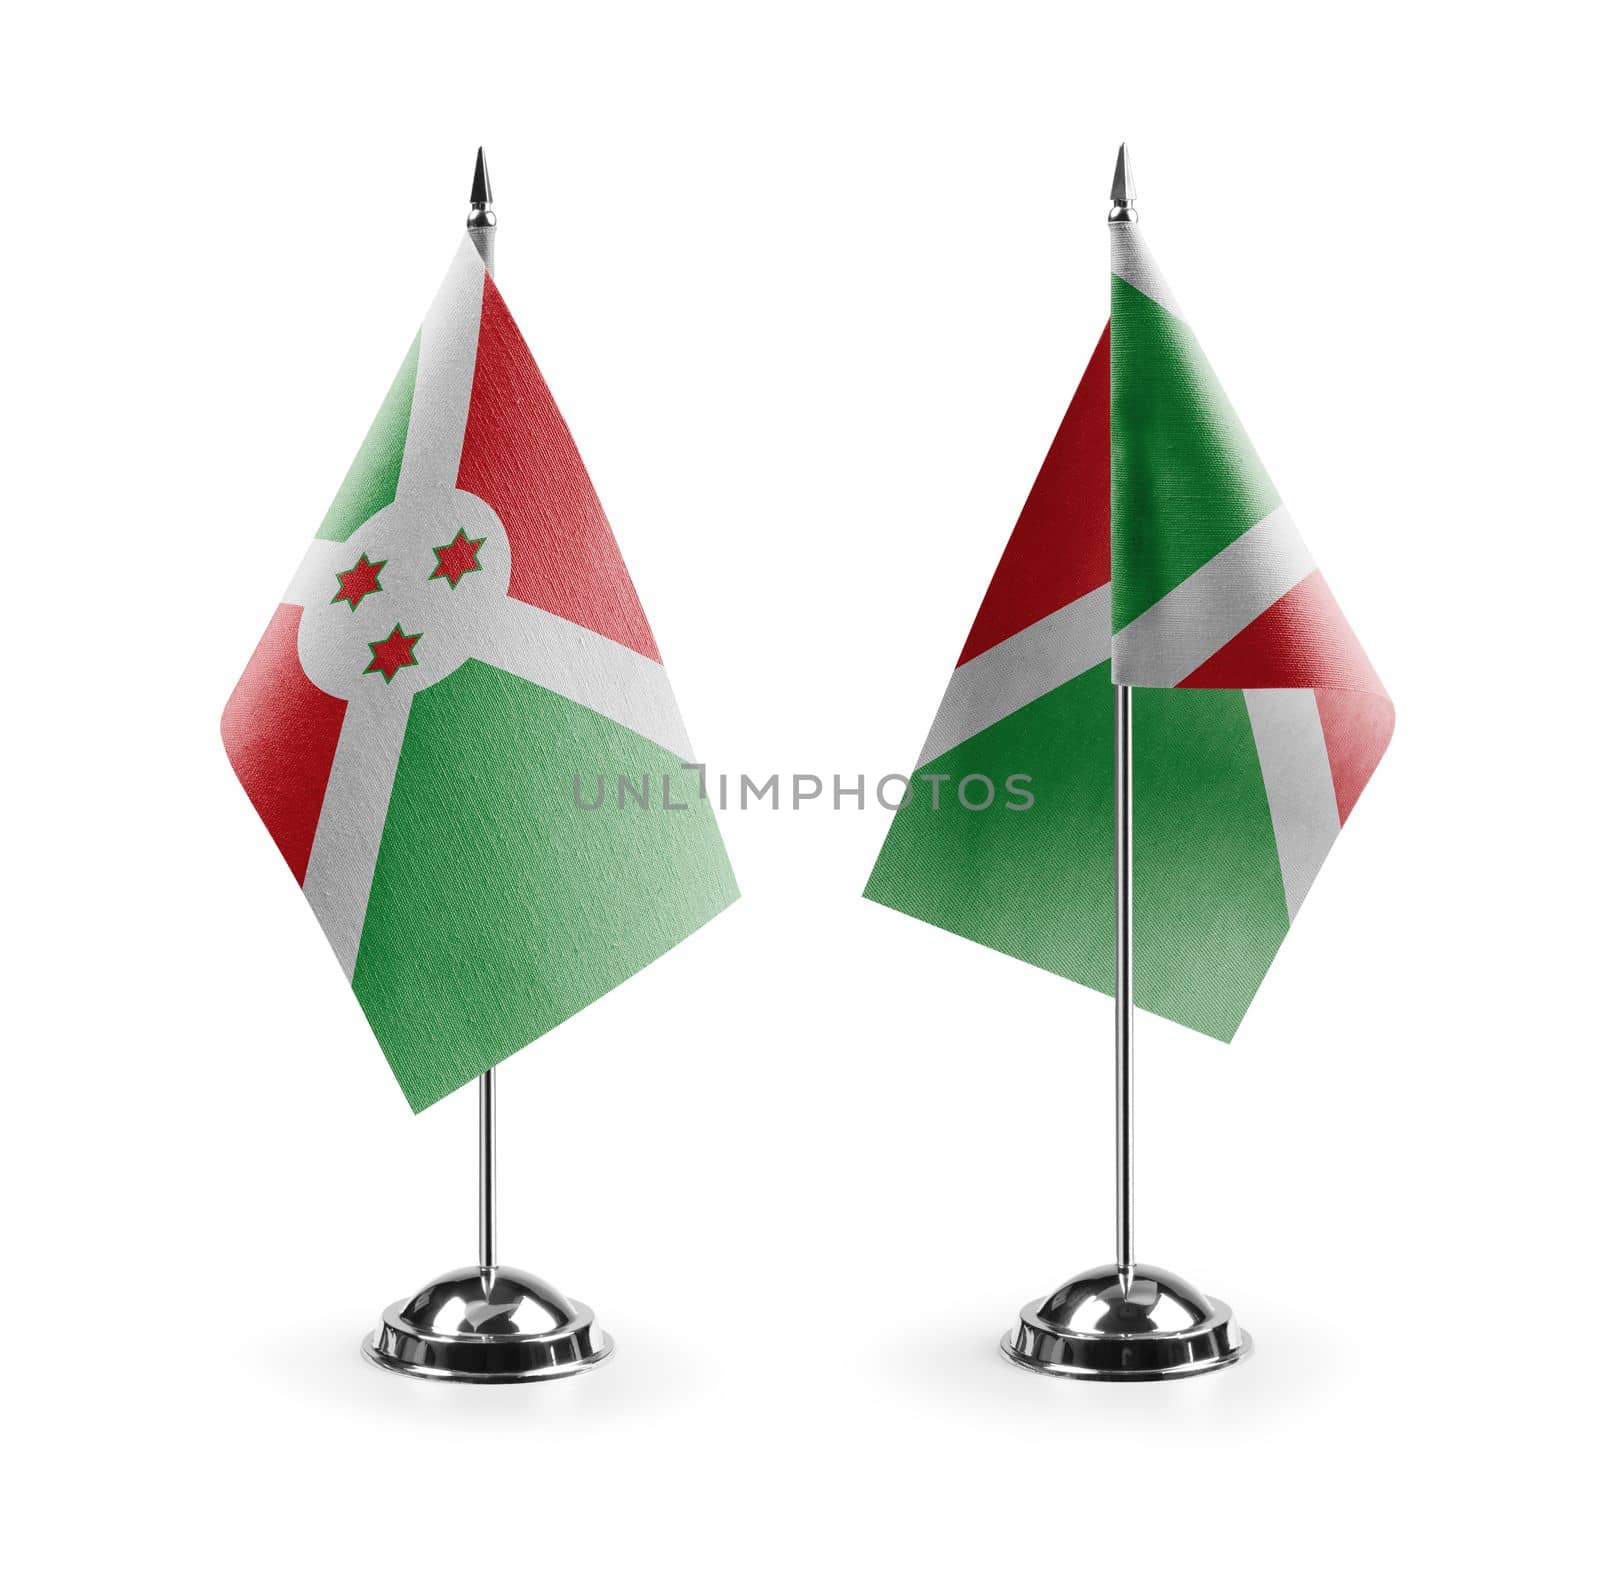 Small national flags of the Burundi on a white background.